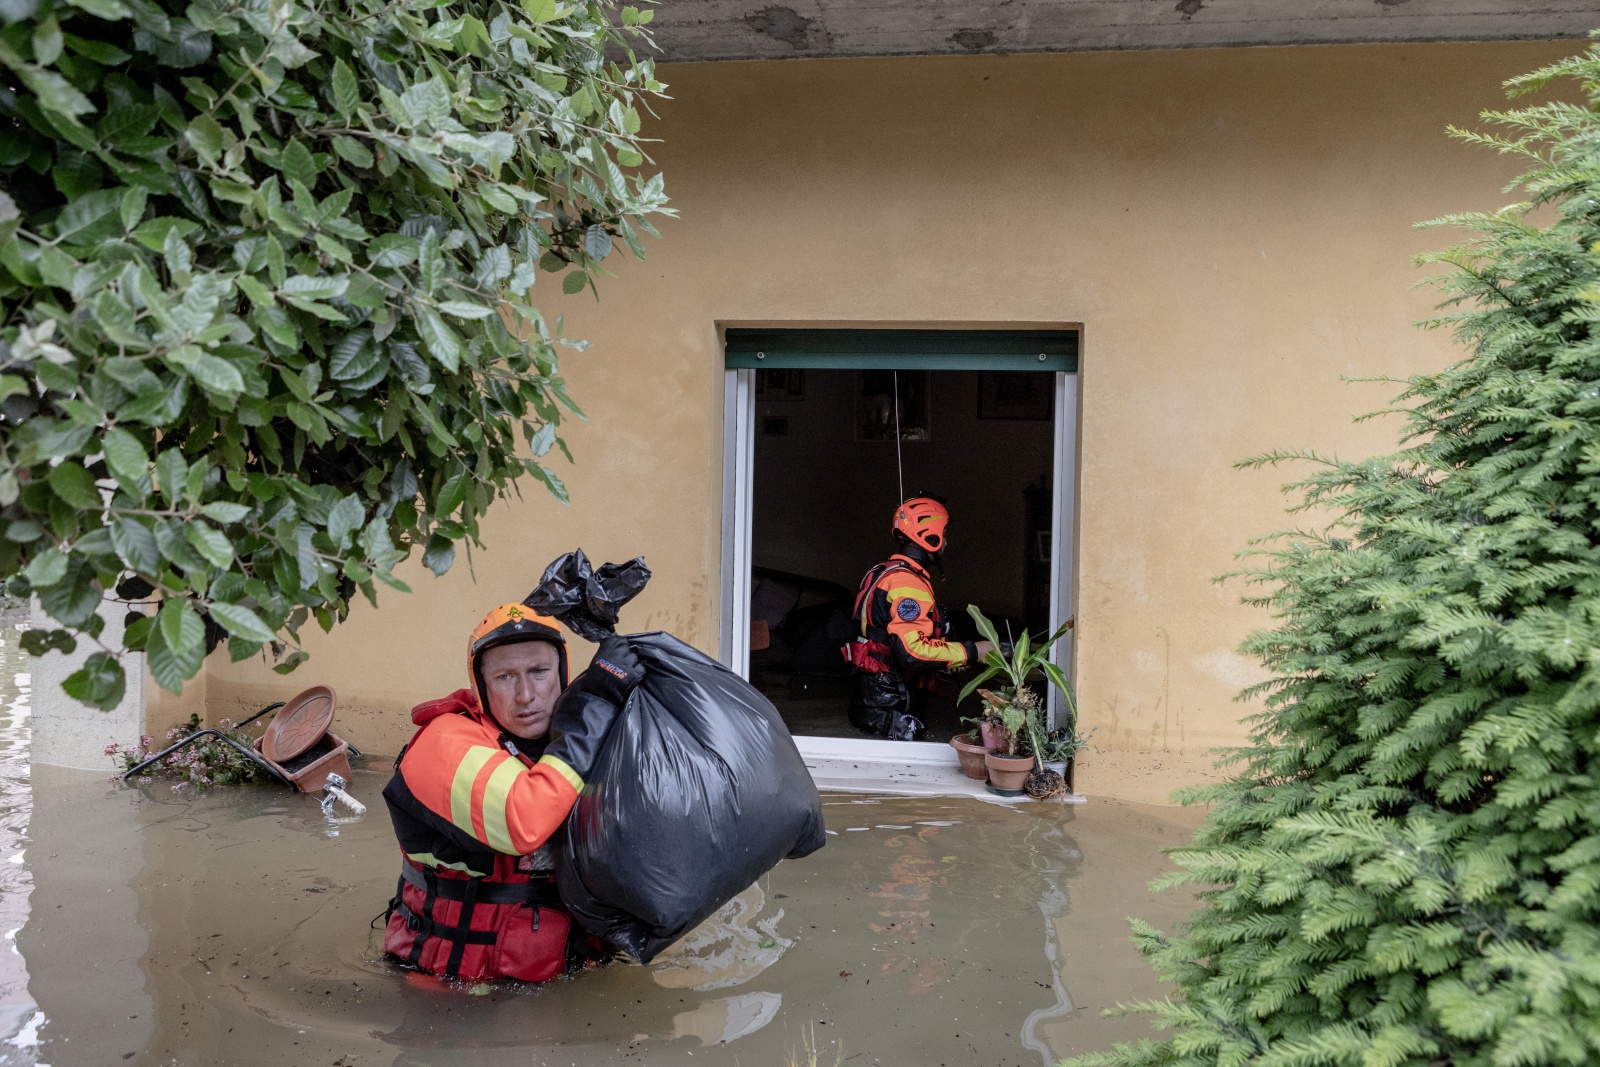 FORNACE ZARATTINI, ITALY – MAY 20: 
Firefighters rescue people and recover their belongings in houses submerged in water. The flood and the overflow of rivers, in fact, has invaded entire neighborhoods and in some points exceeds one meter of depth in Fornace Zarattini, Emilia Romagna, on May 20, 2023.
